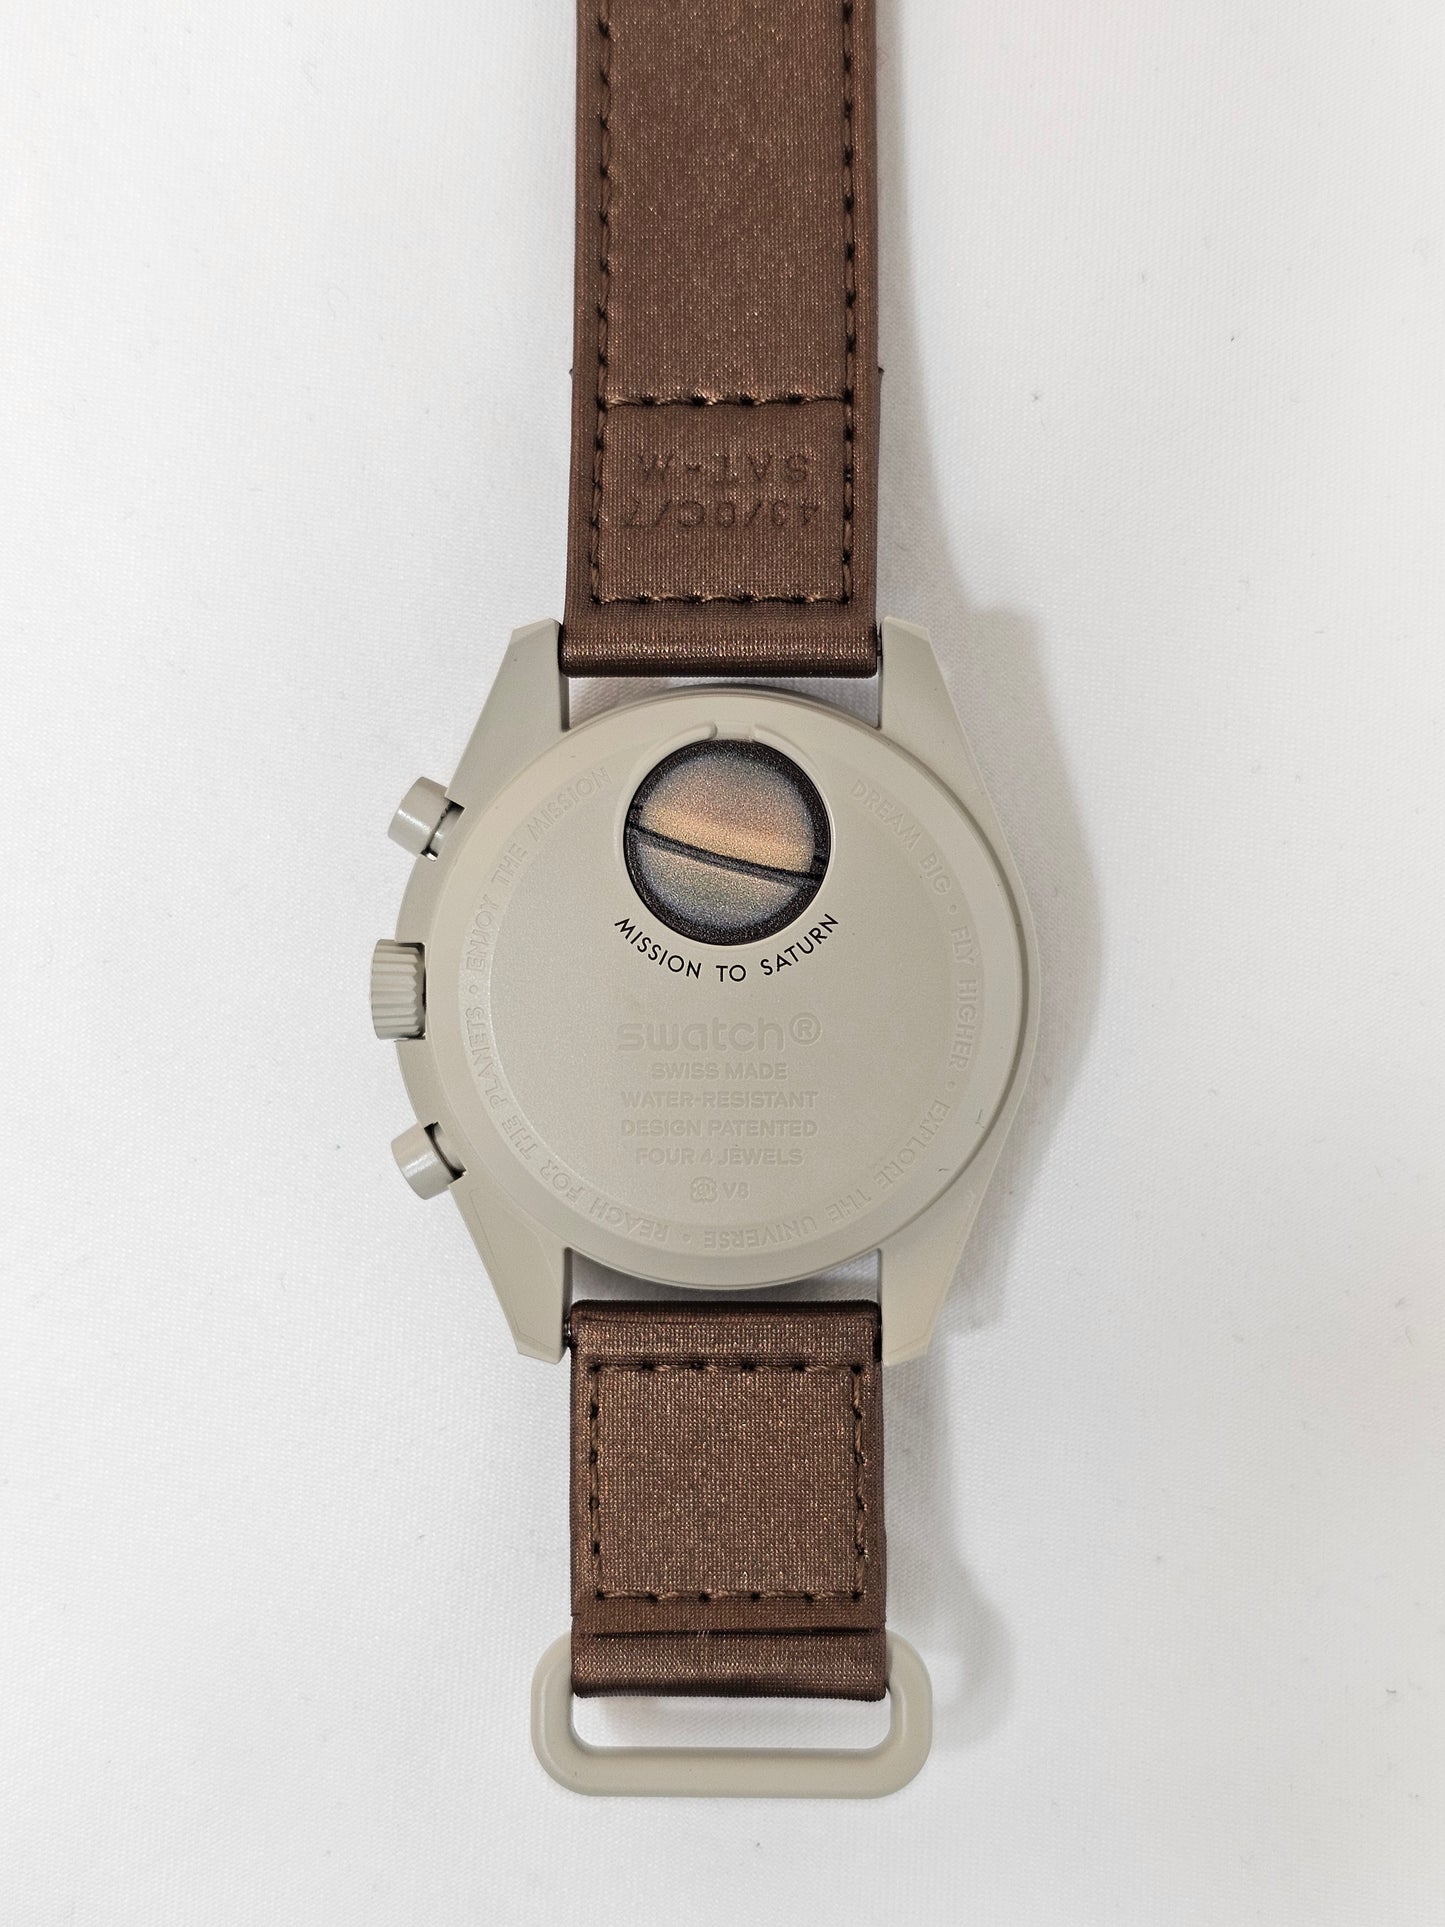 Swatch Moonswatch - Mission to Saturn: Time's Journey through Celestial Beauty